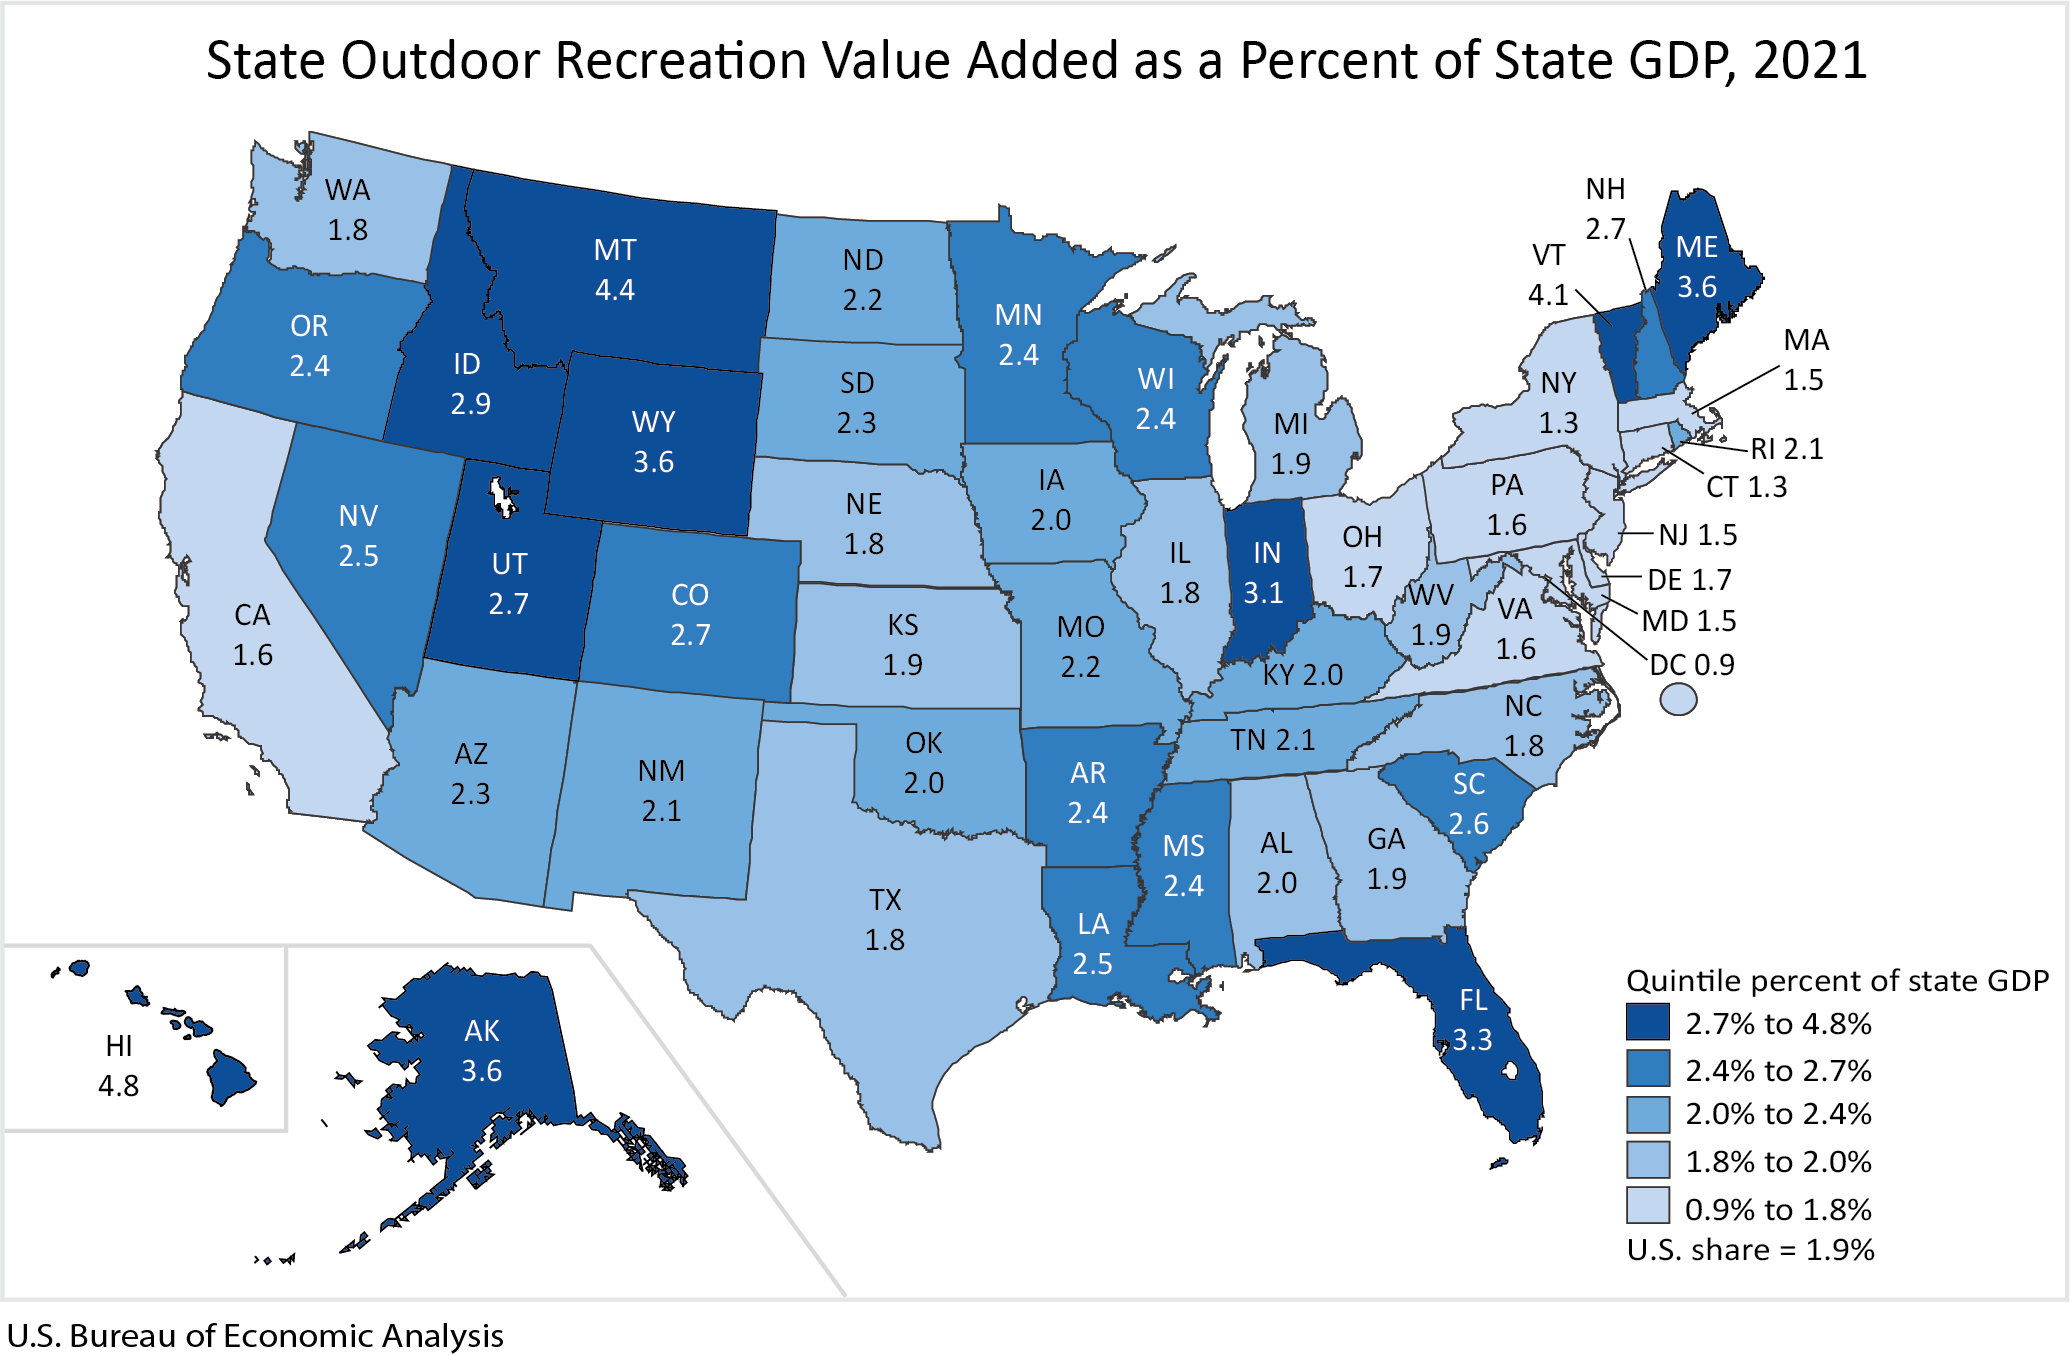 State Outdoor Recreation Value Added as a Percent of State GDP, 2021